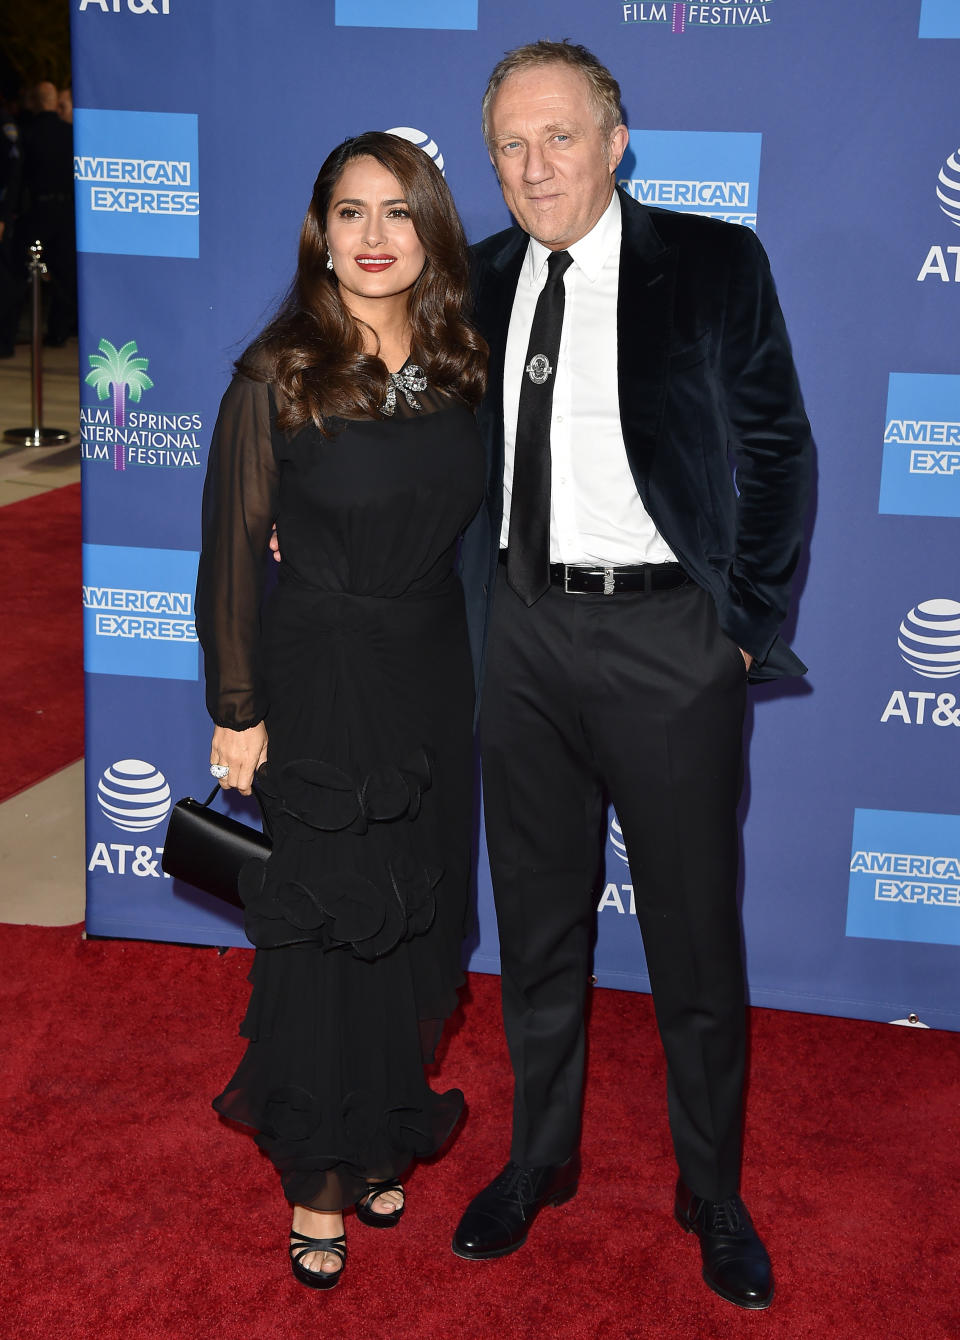 PALM SPRINGS, CALIFORNIA - JANUARY 02: Salma Hayek and François-Henri Pinault attend the 2020 Annual Palm Springs International Film Festival Film Awards Gala on January 02, 2020 in Palm Springs, California. (Photo by Axelle/Bauer-Griffin/FilmMagic)